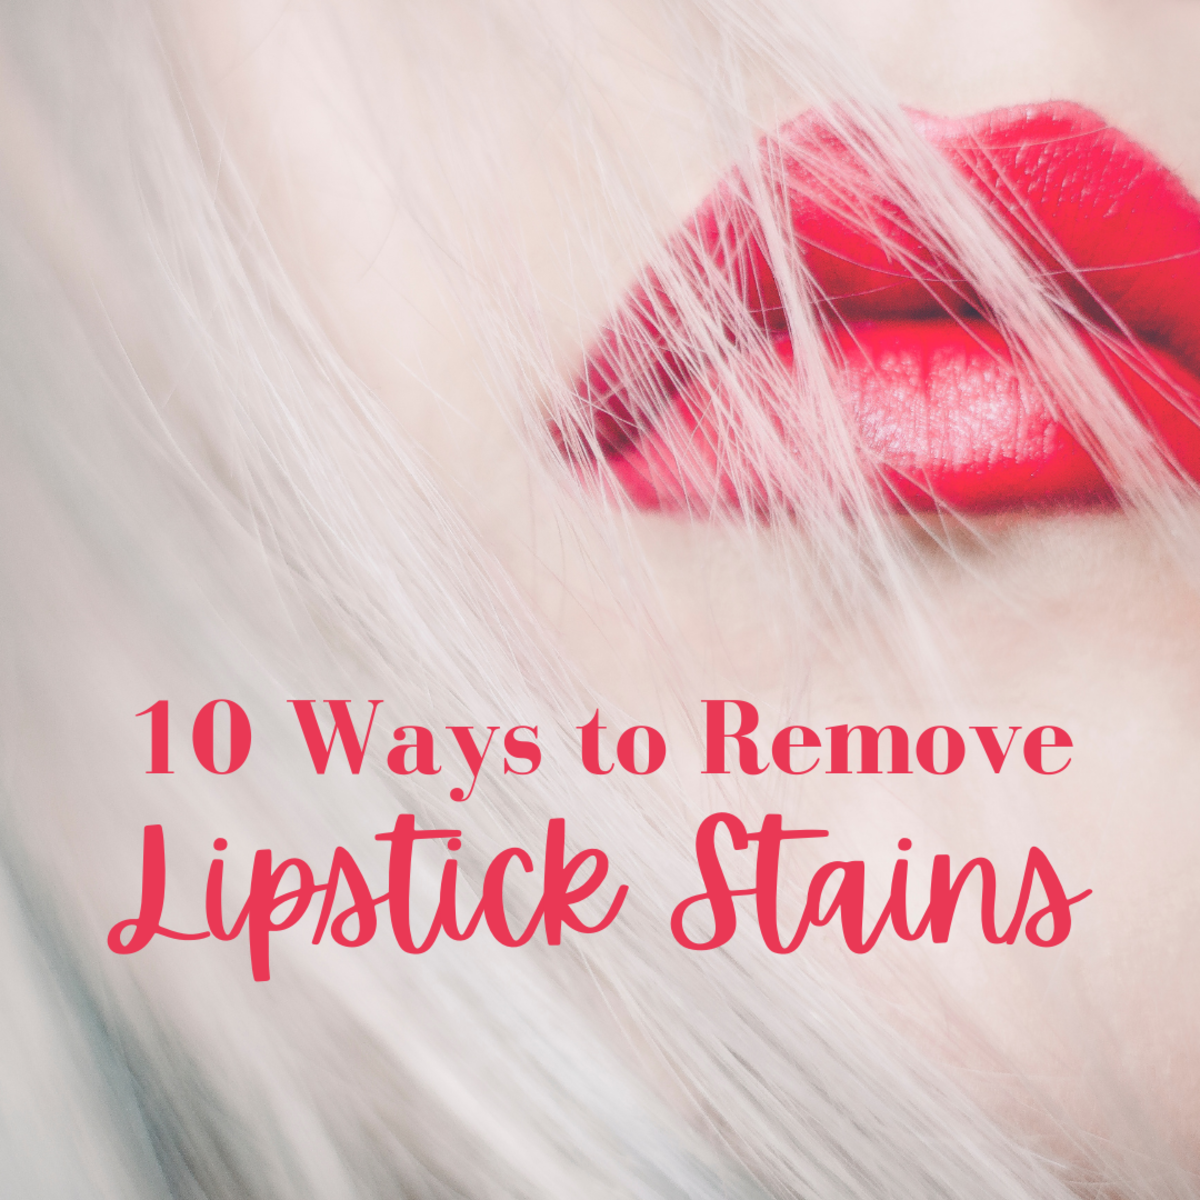 Removing lipstick stains can be a real pain—here are 10 DIY lipstick removal tips to help you get rid of those pesky stains!